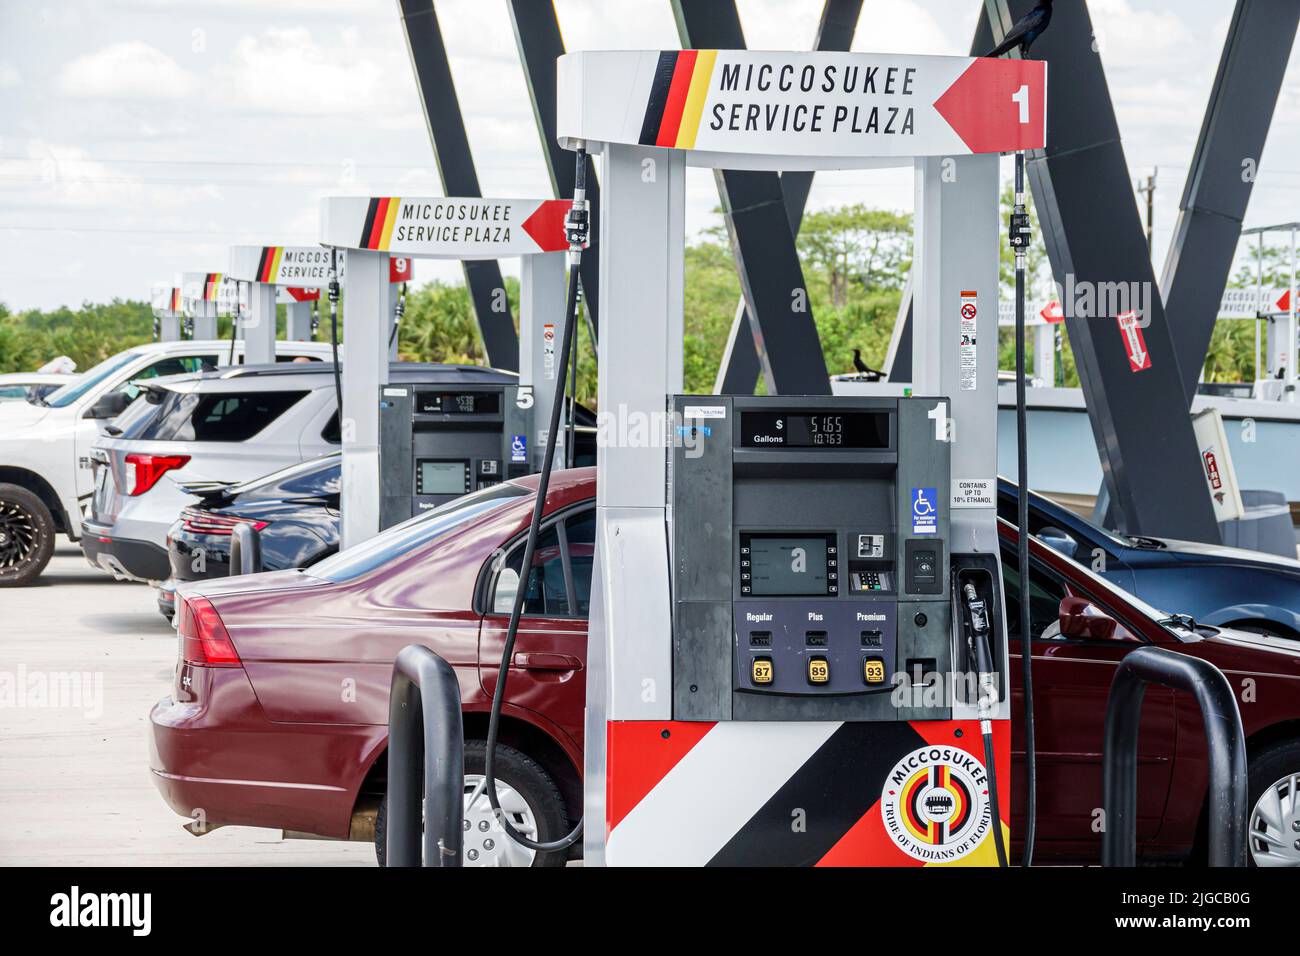 Miccosukee Indian Reservation Florida Everglades,Service Plaza gas petrol station convenience store,Native American owned business along I-75 intersta Stock Photo